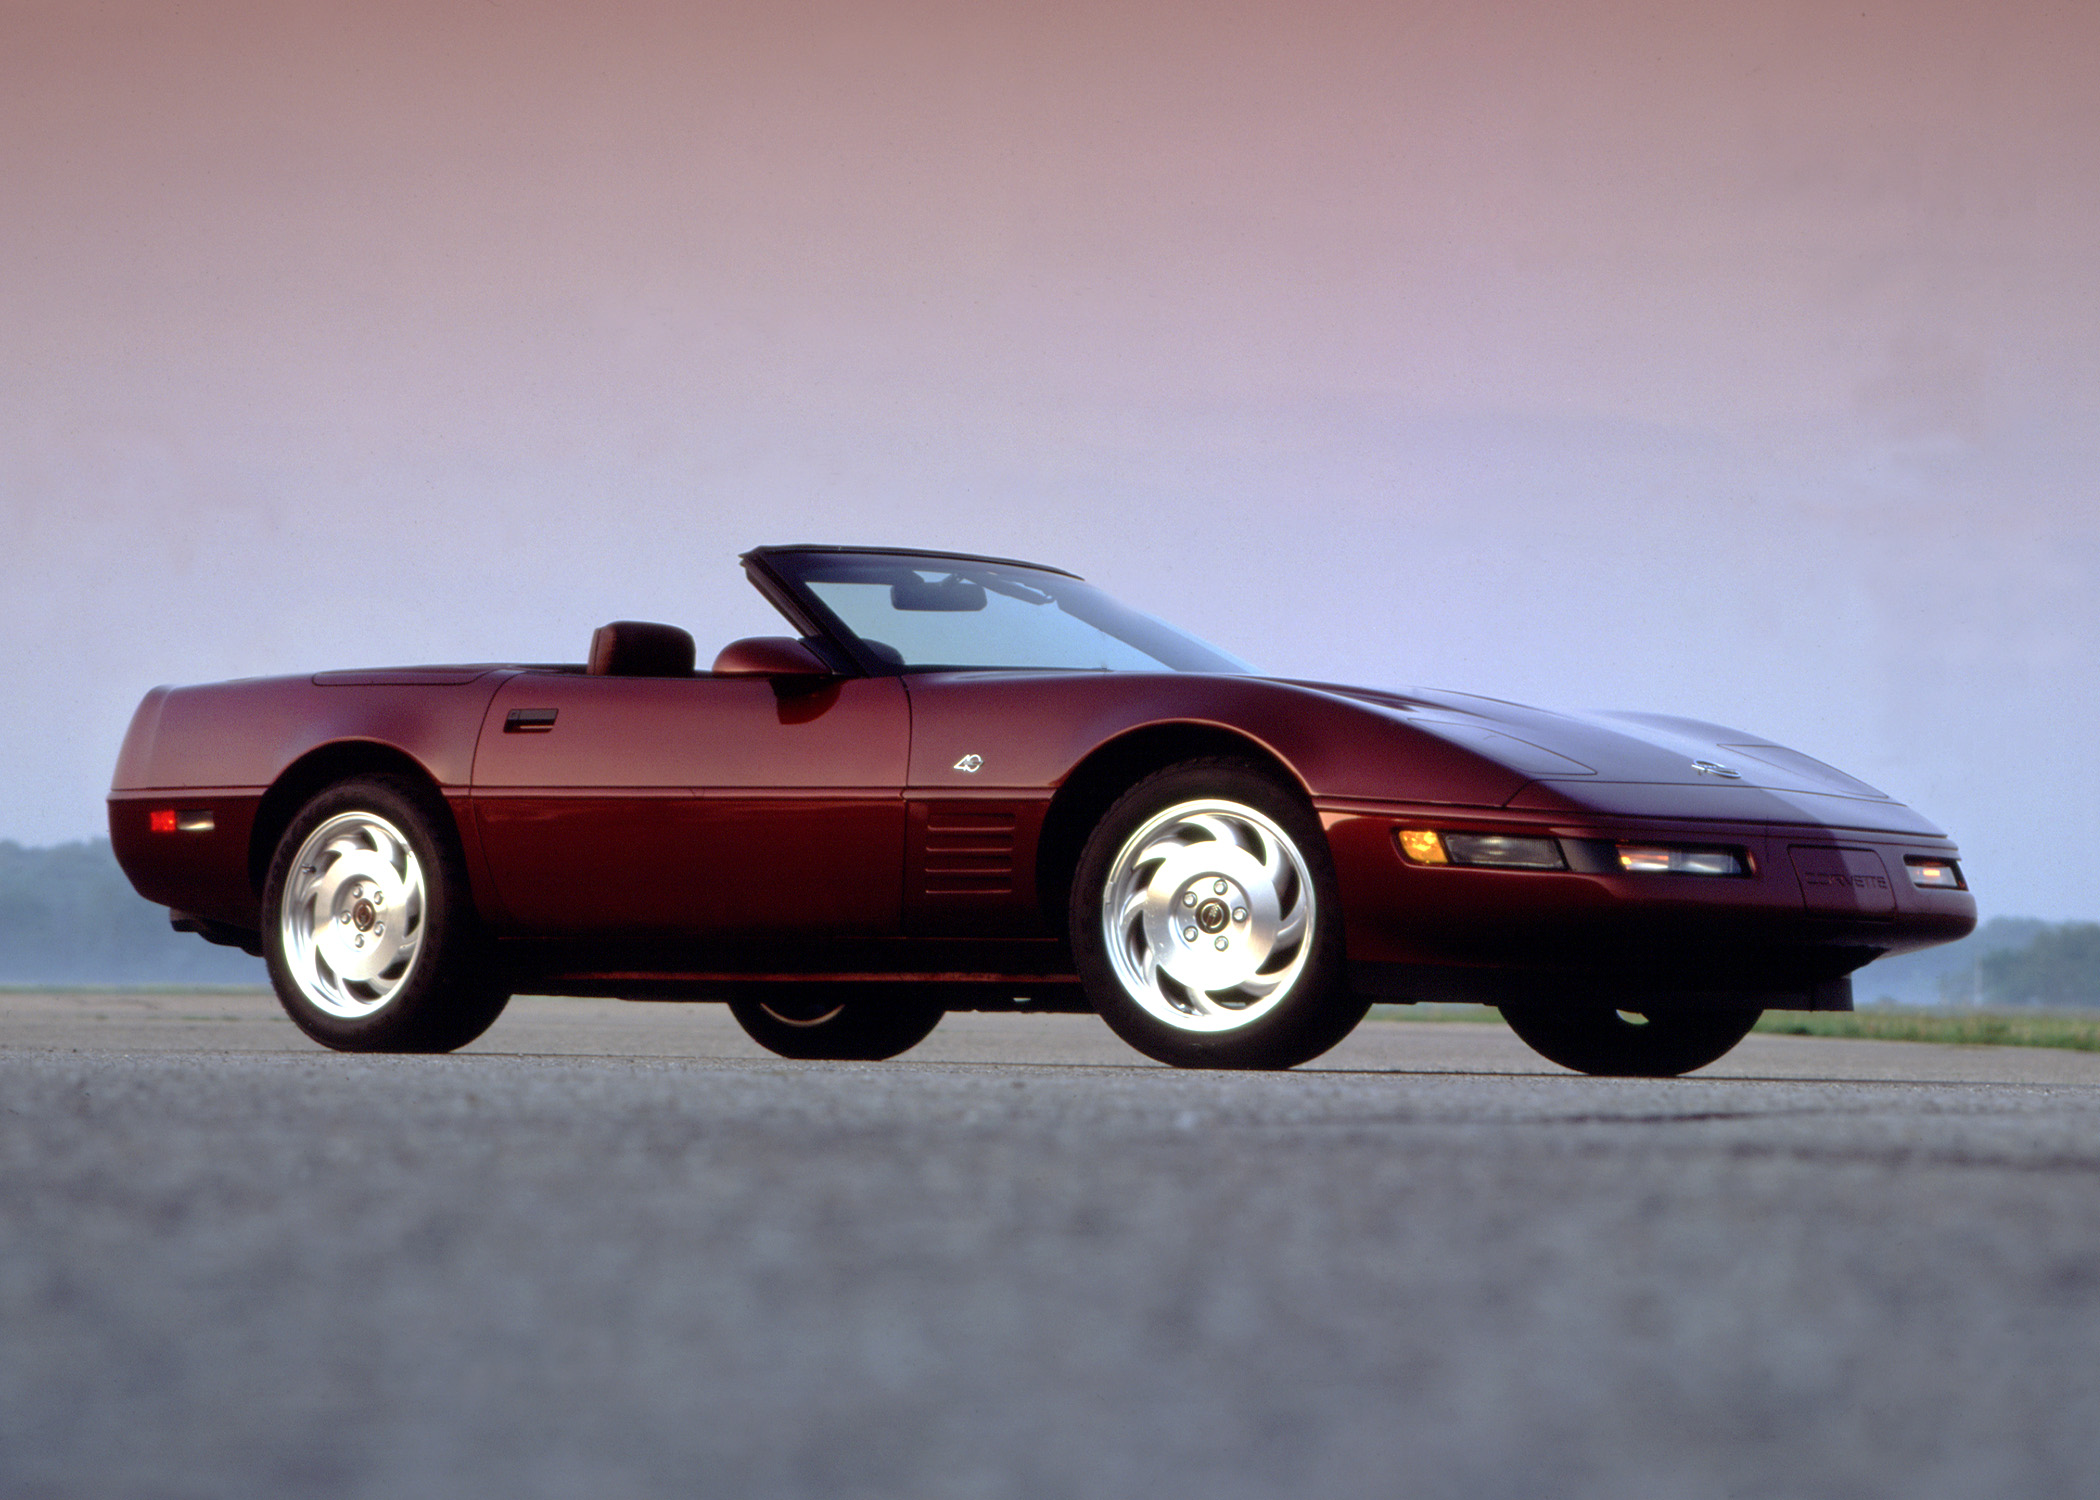 A maroon C4 Corvette was the American sports car of the '90s, seen here at the front 3/4 angle